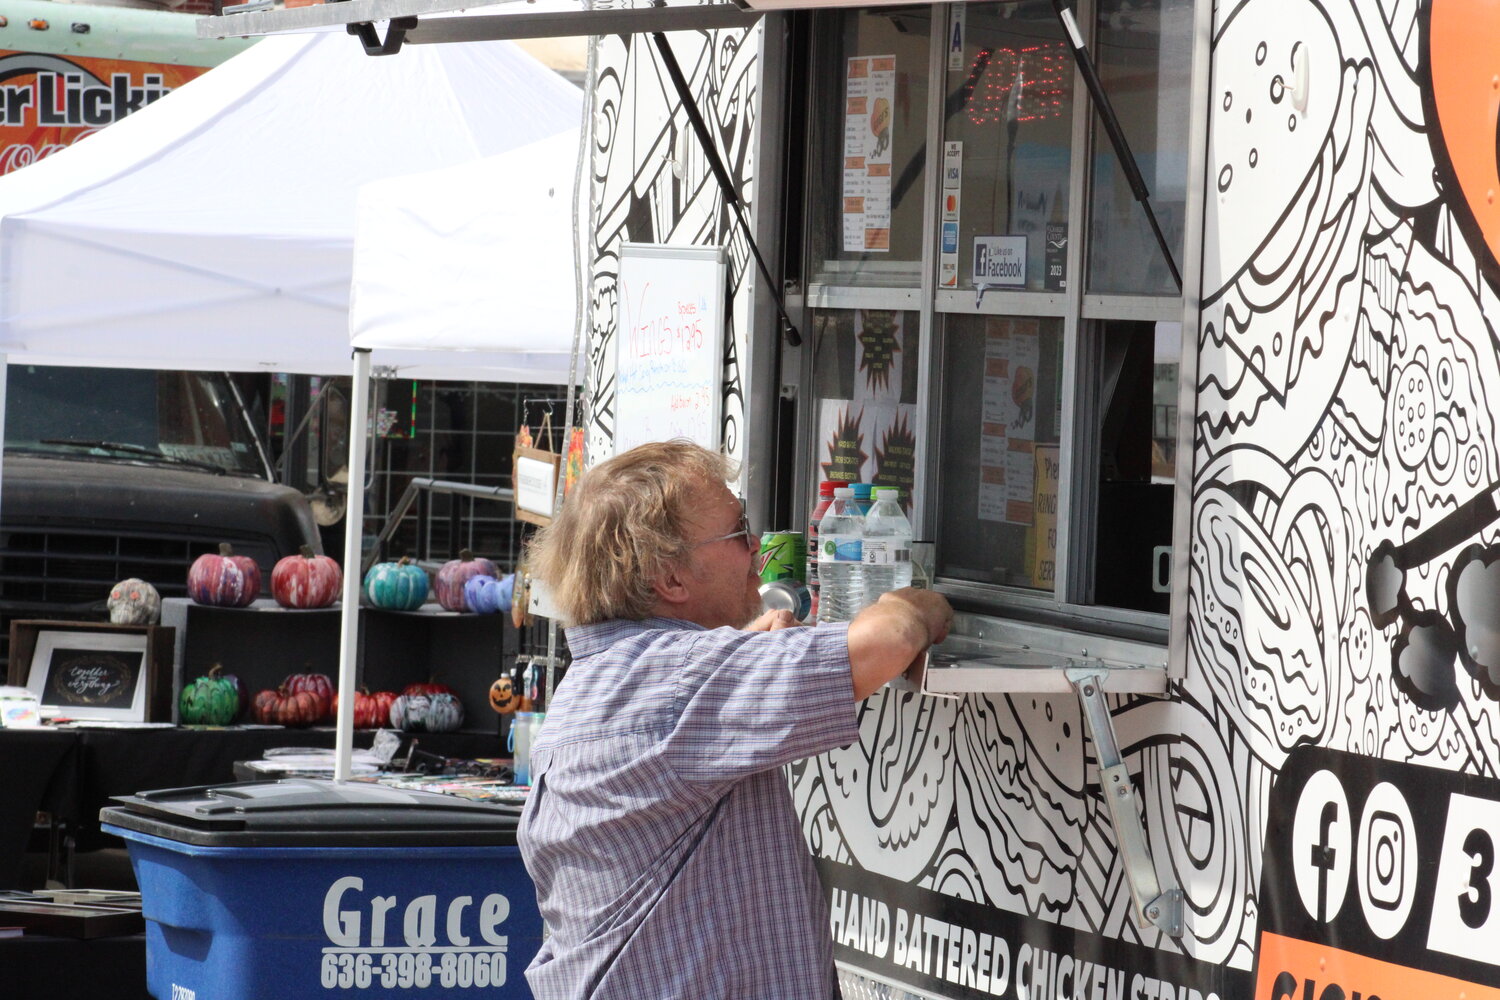 A man orders at one of the food trucks at the Fall Festival.